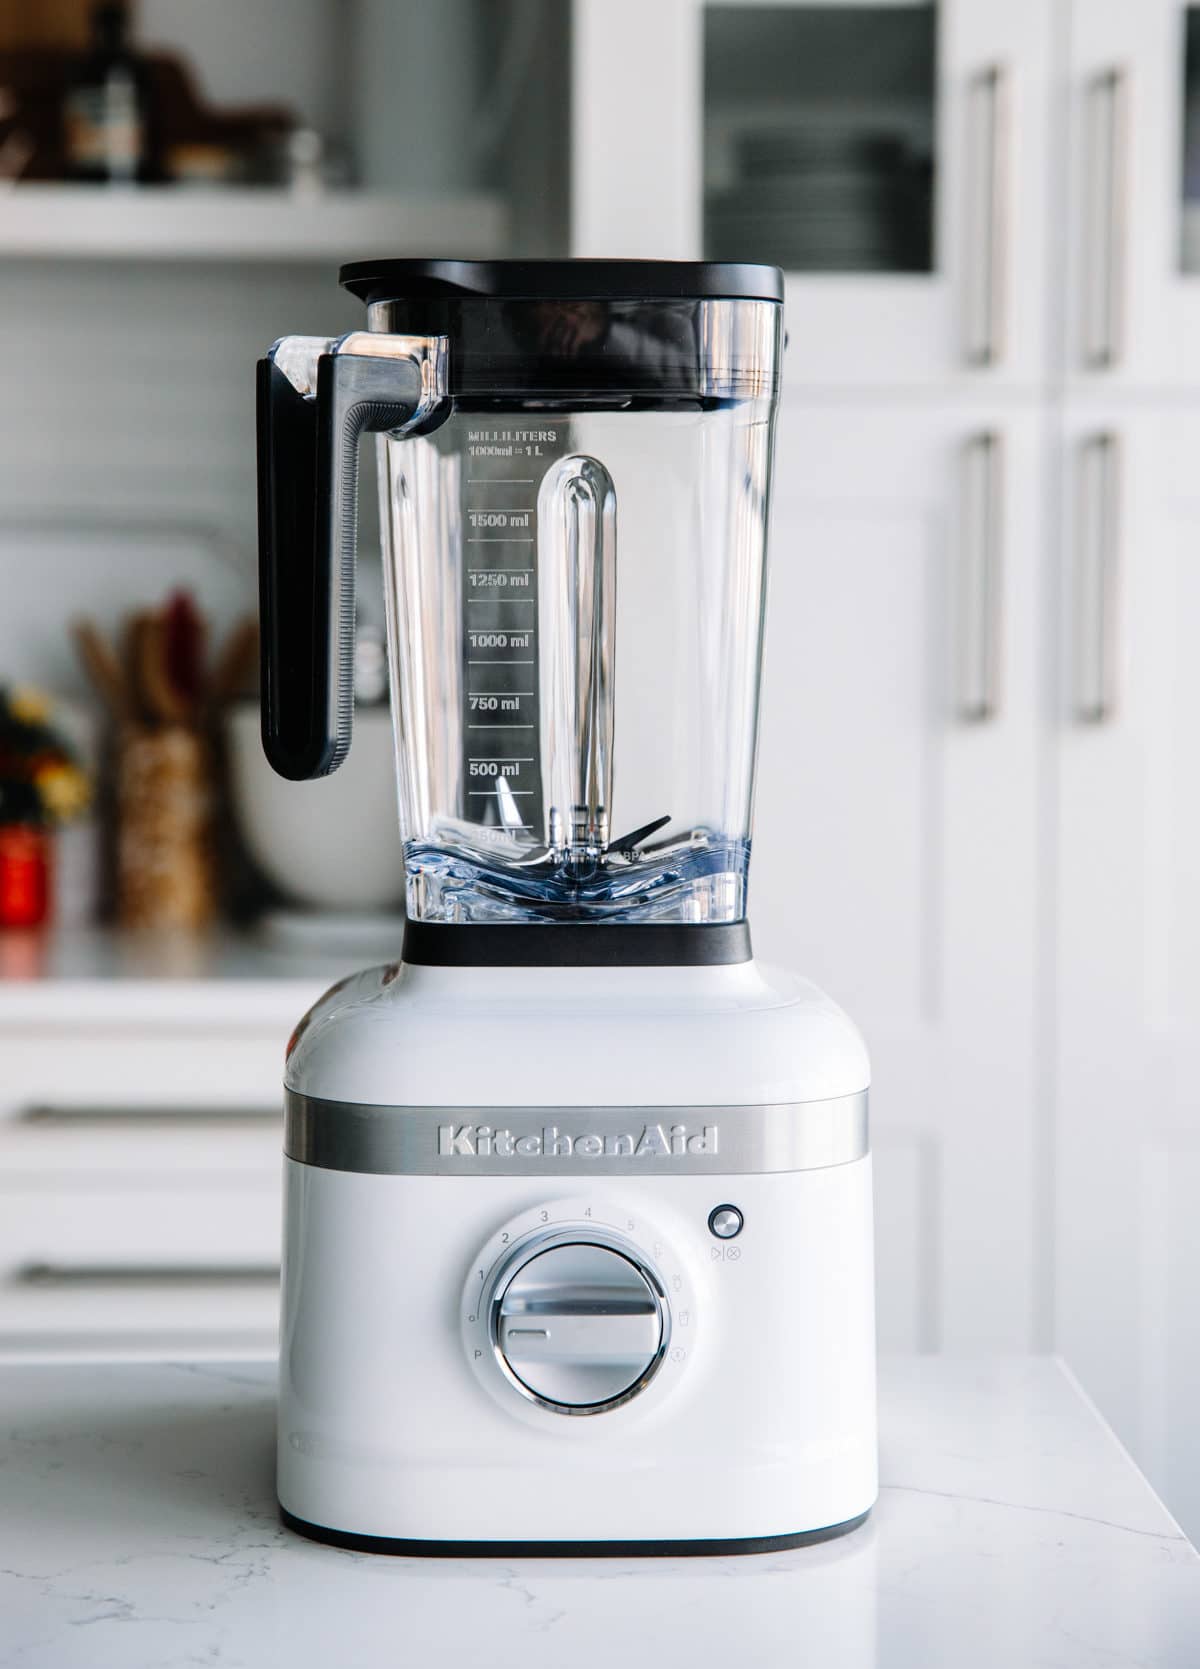 A Kitchen Aid high speed blender with white base on marble countertop.